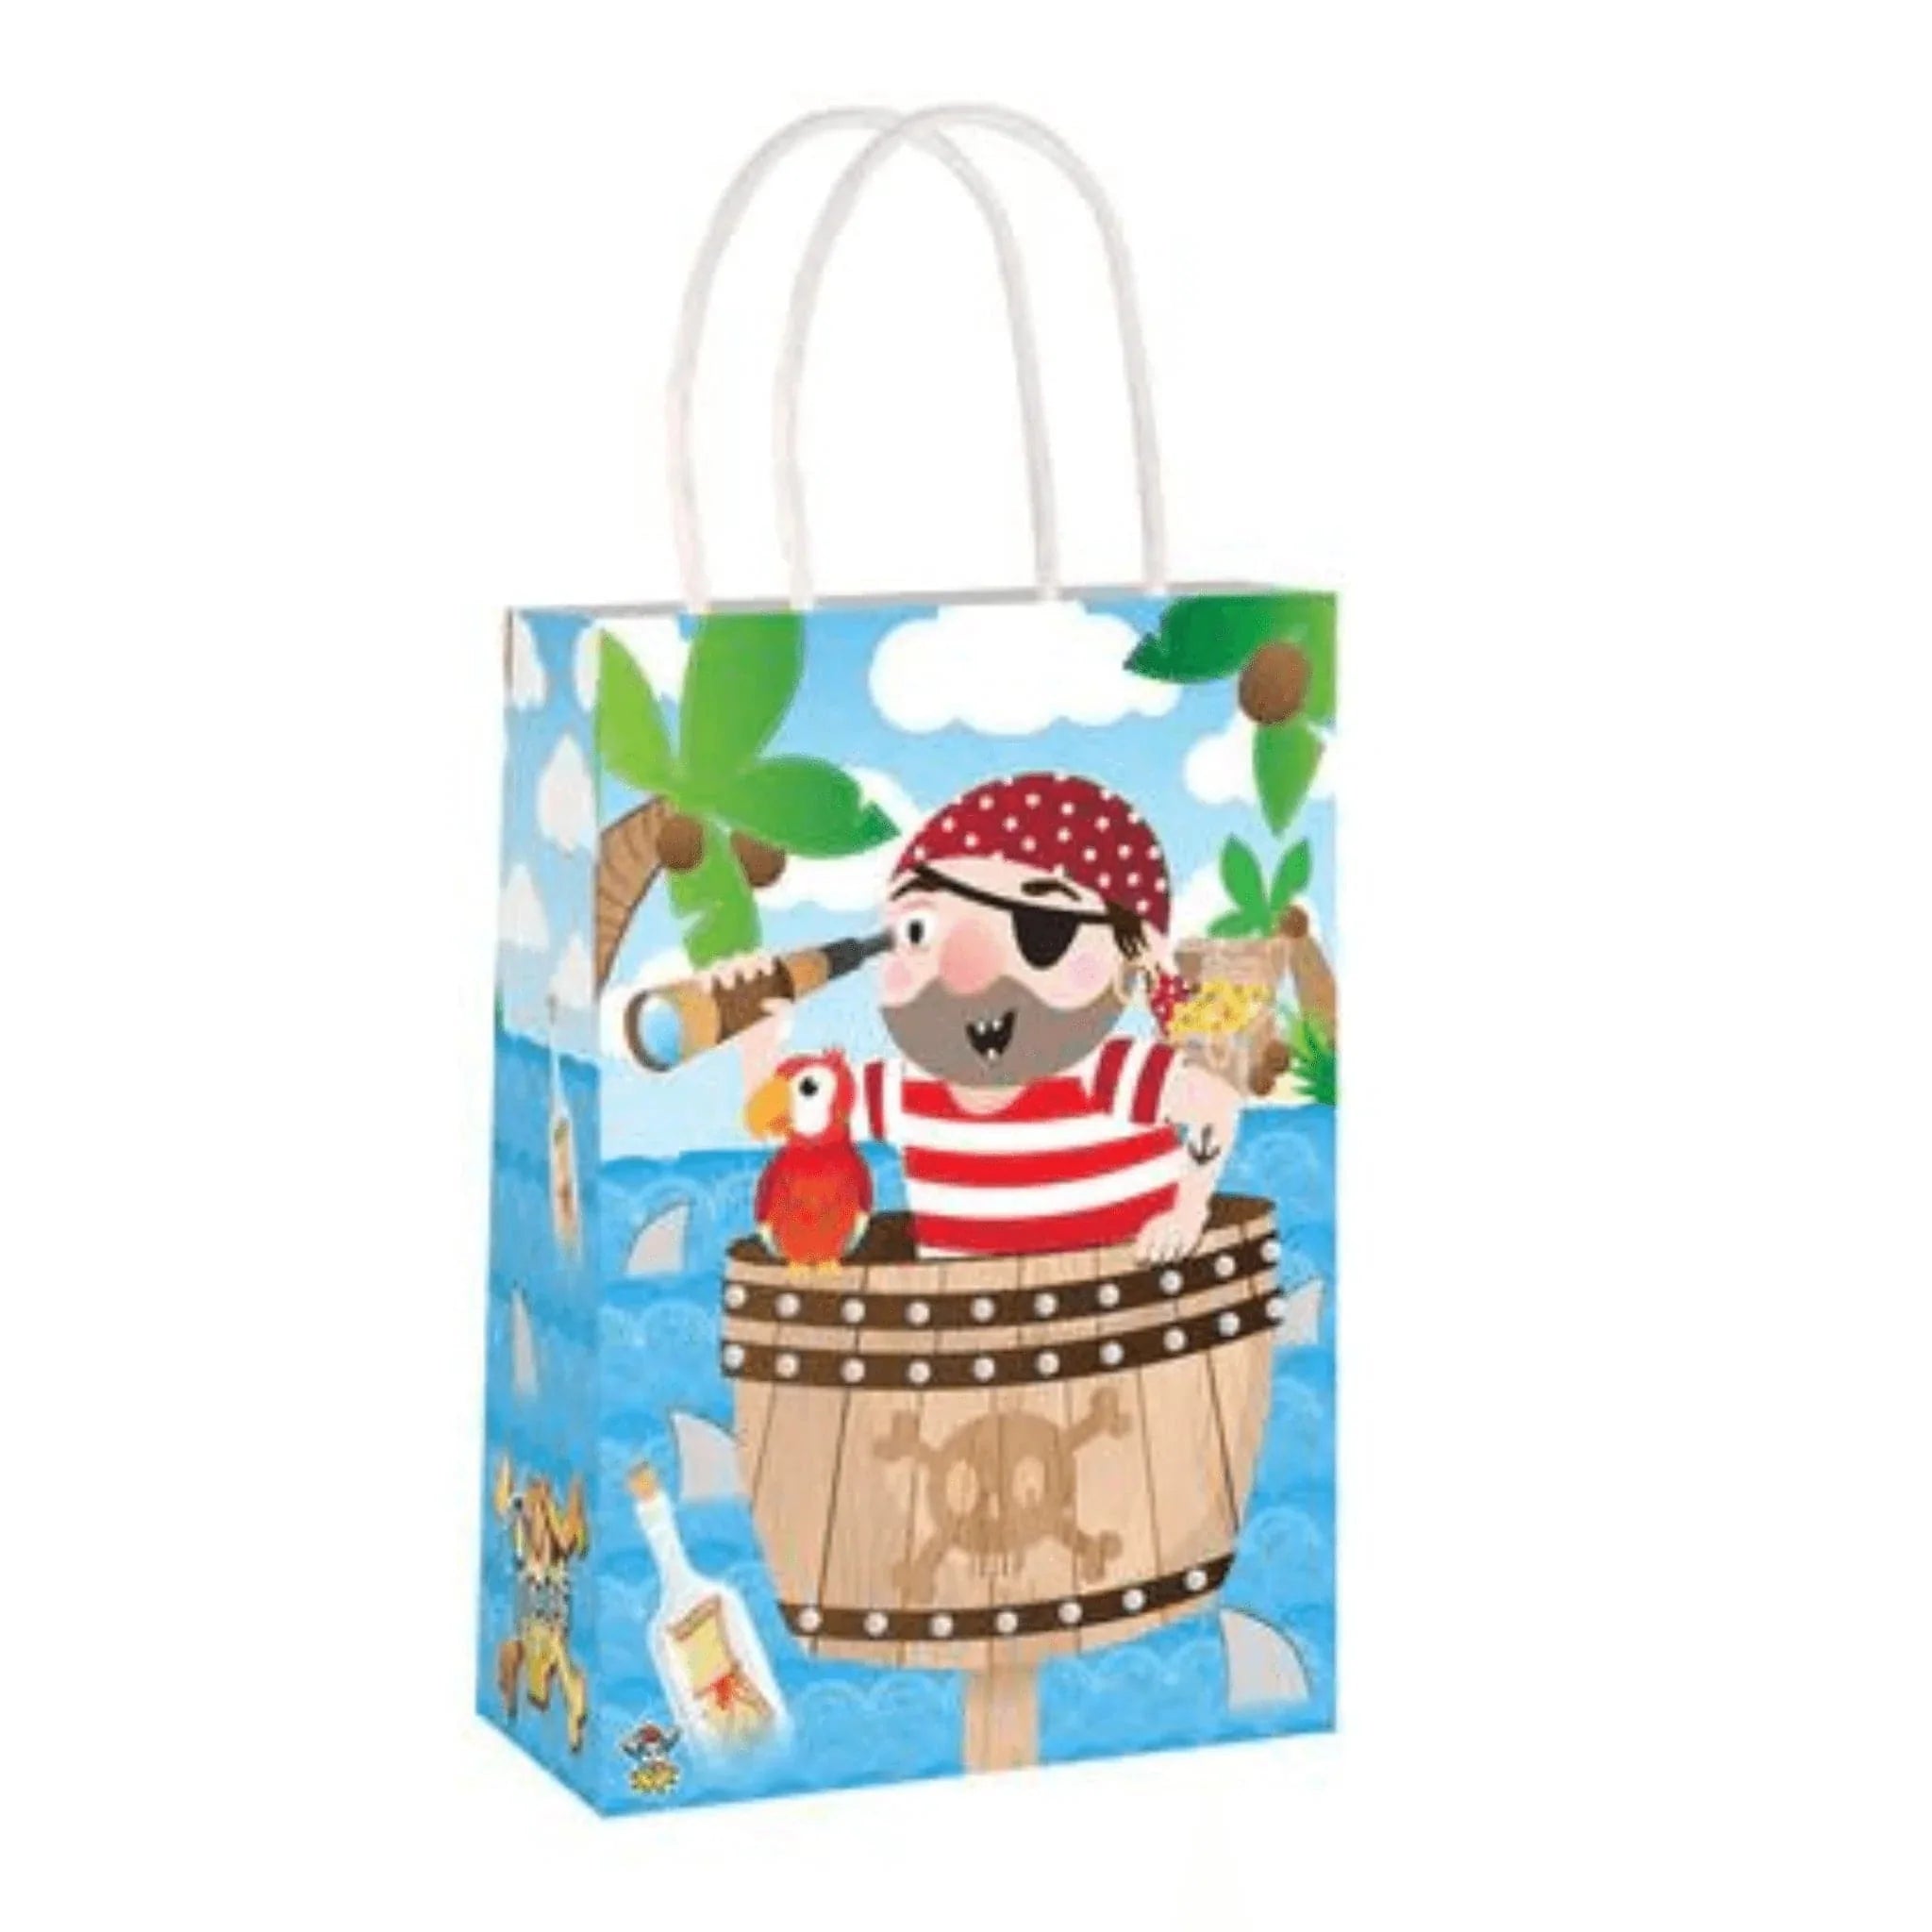 Pirate Party Bags - Kids Party Craft